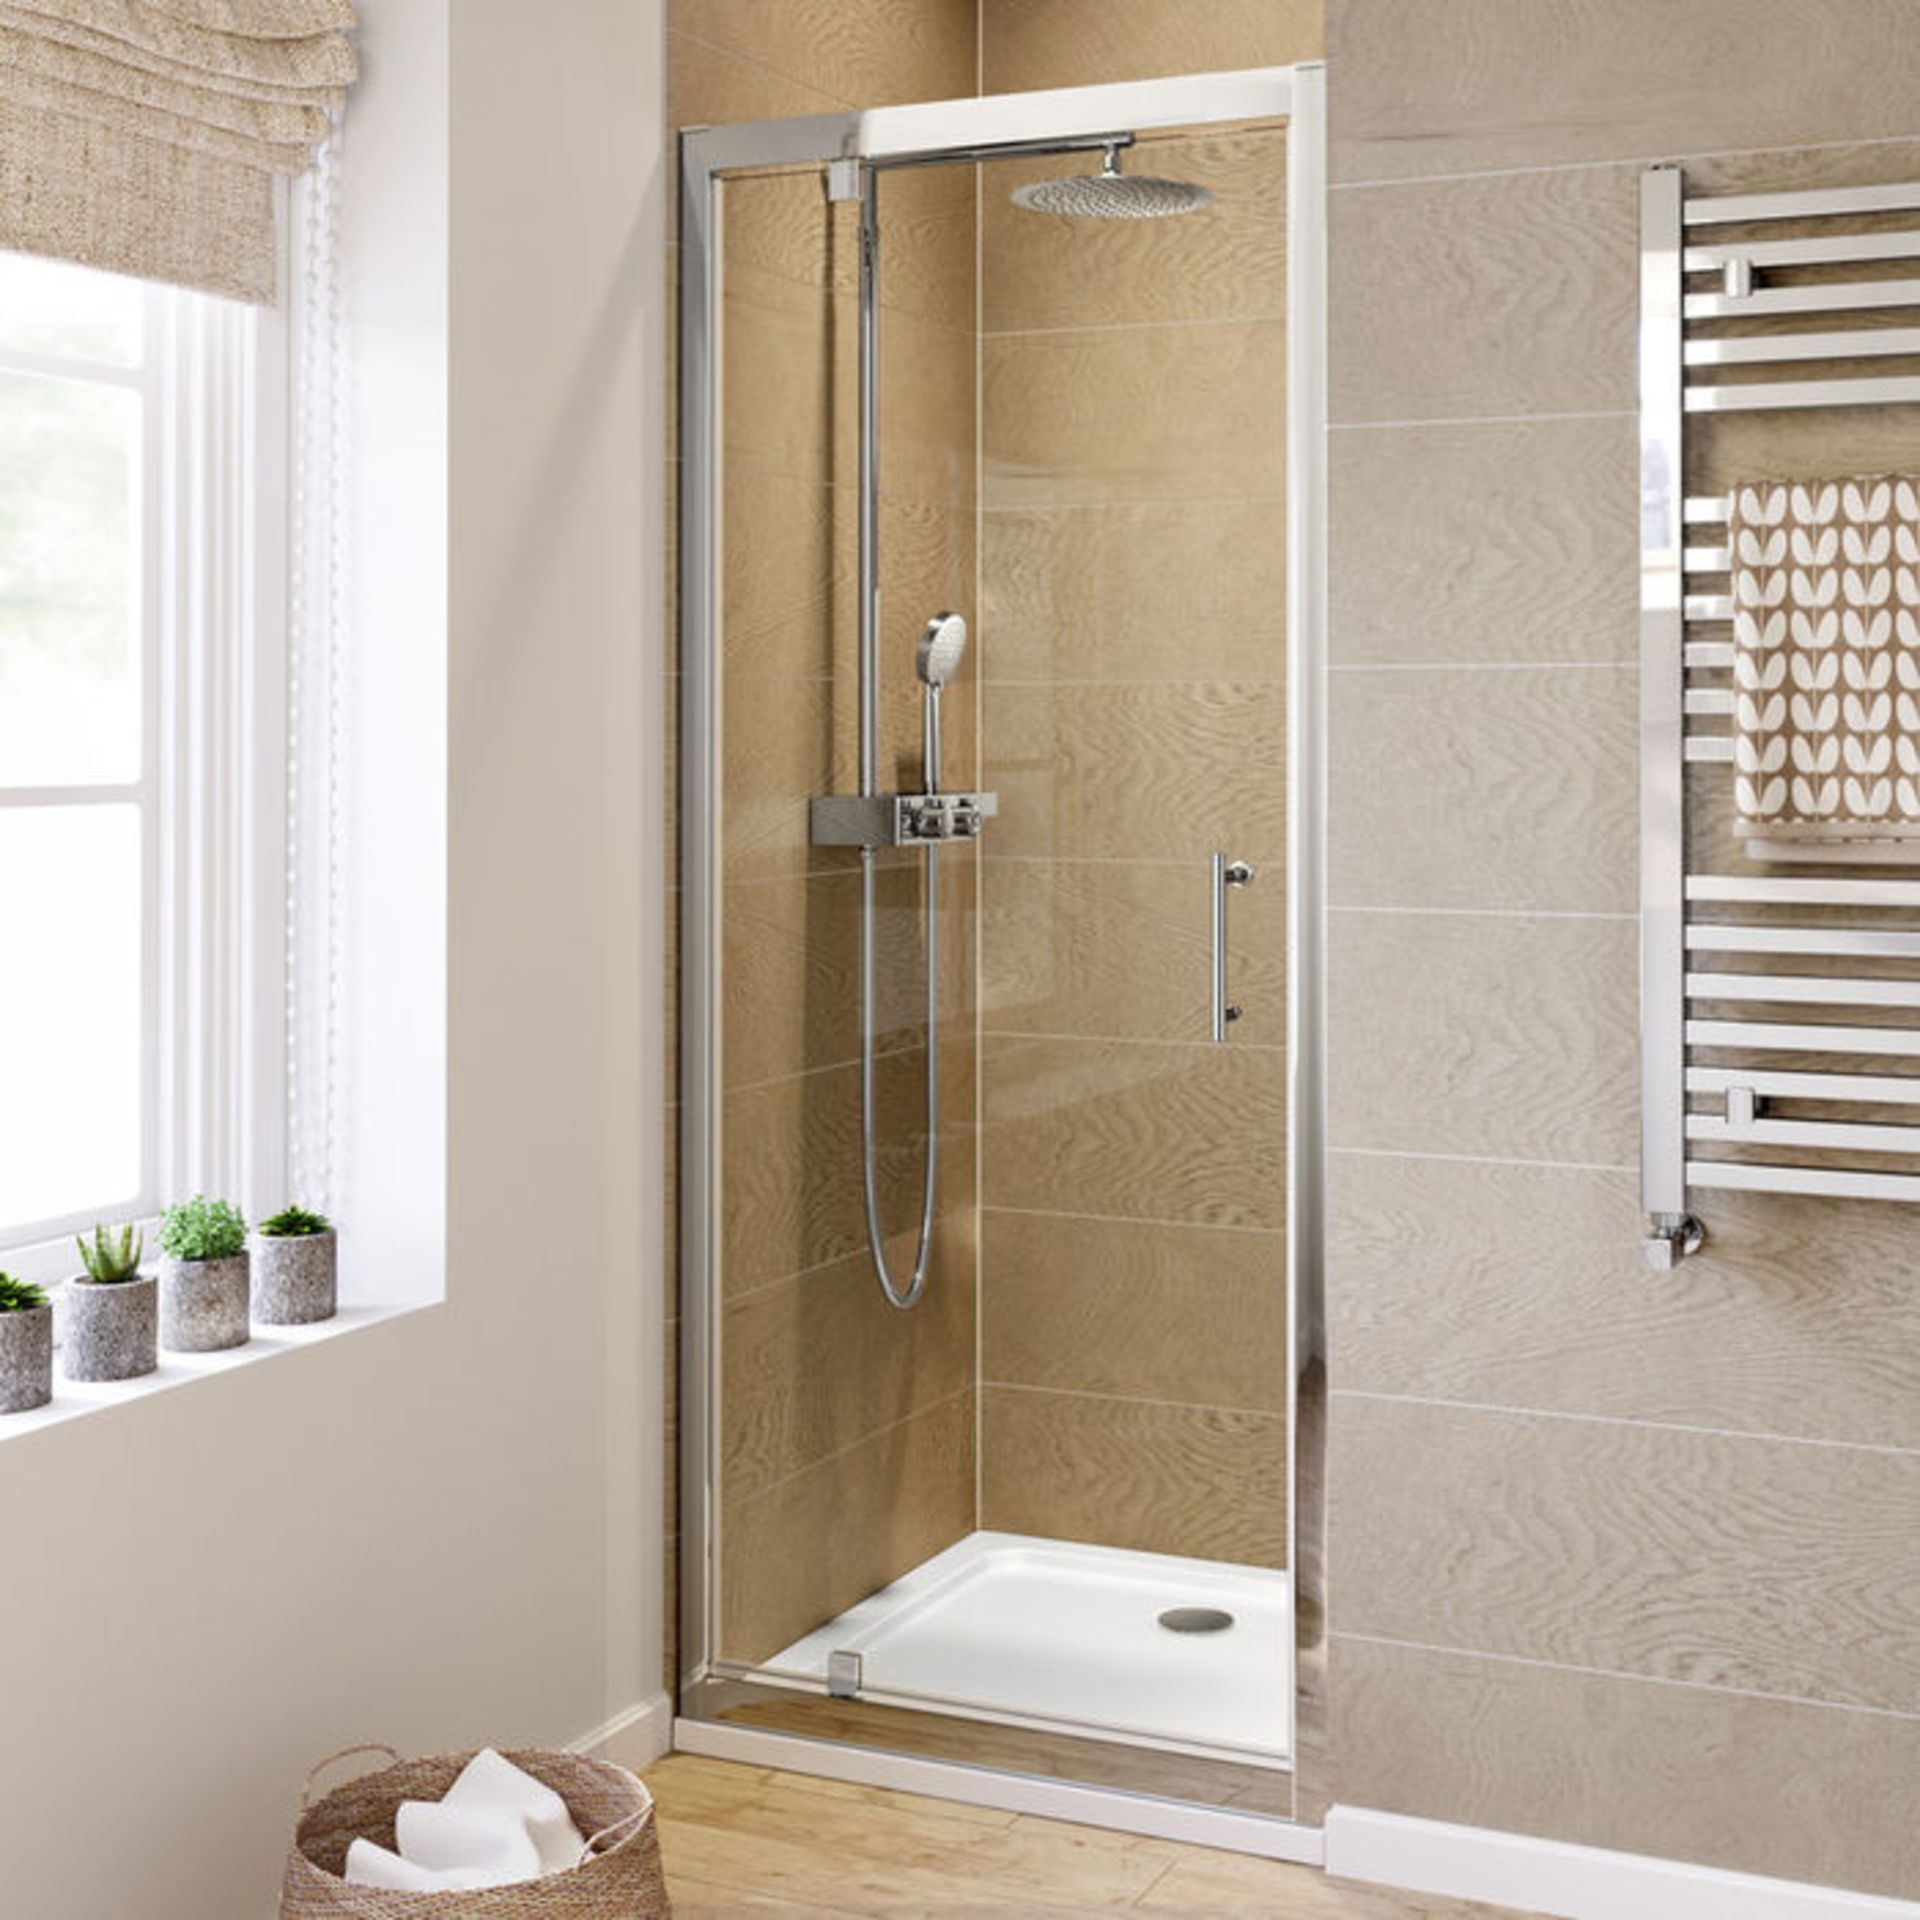 NEW (REF144) 760mm 6mm - Elements Pivot 760mm Shower Door 6mm. Safety Glass Fully waterproof - Image 2 of 2